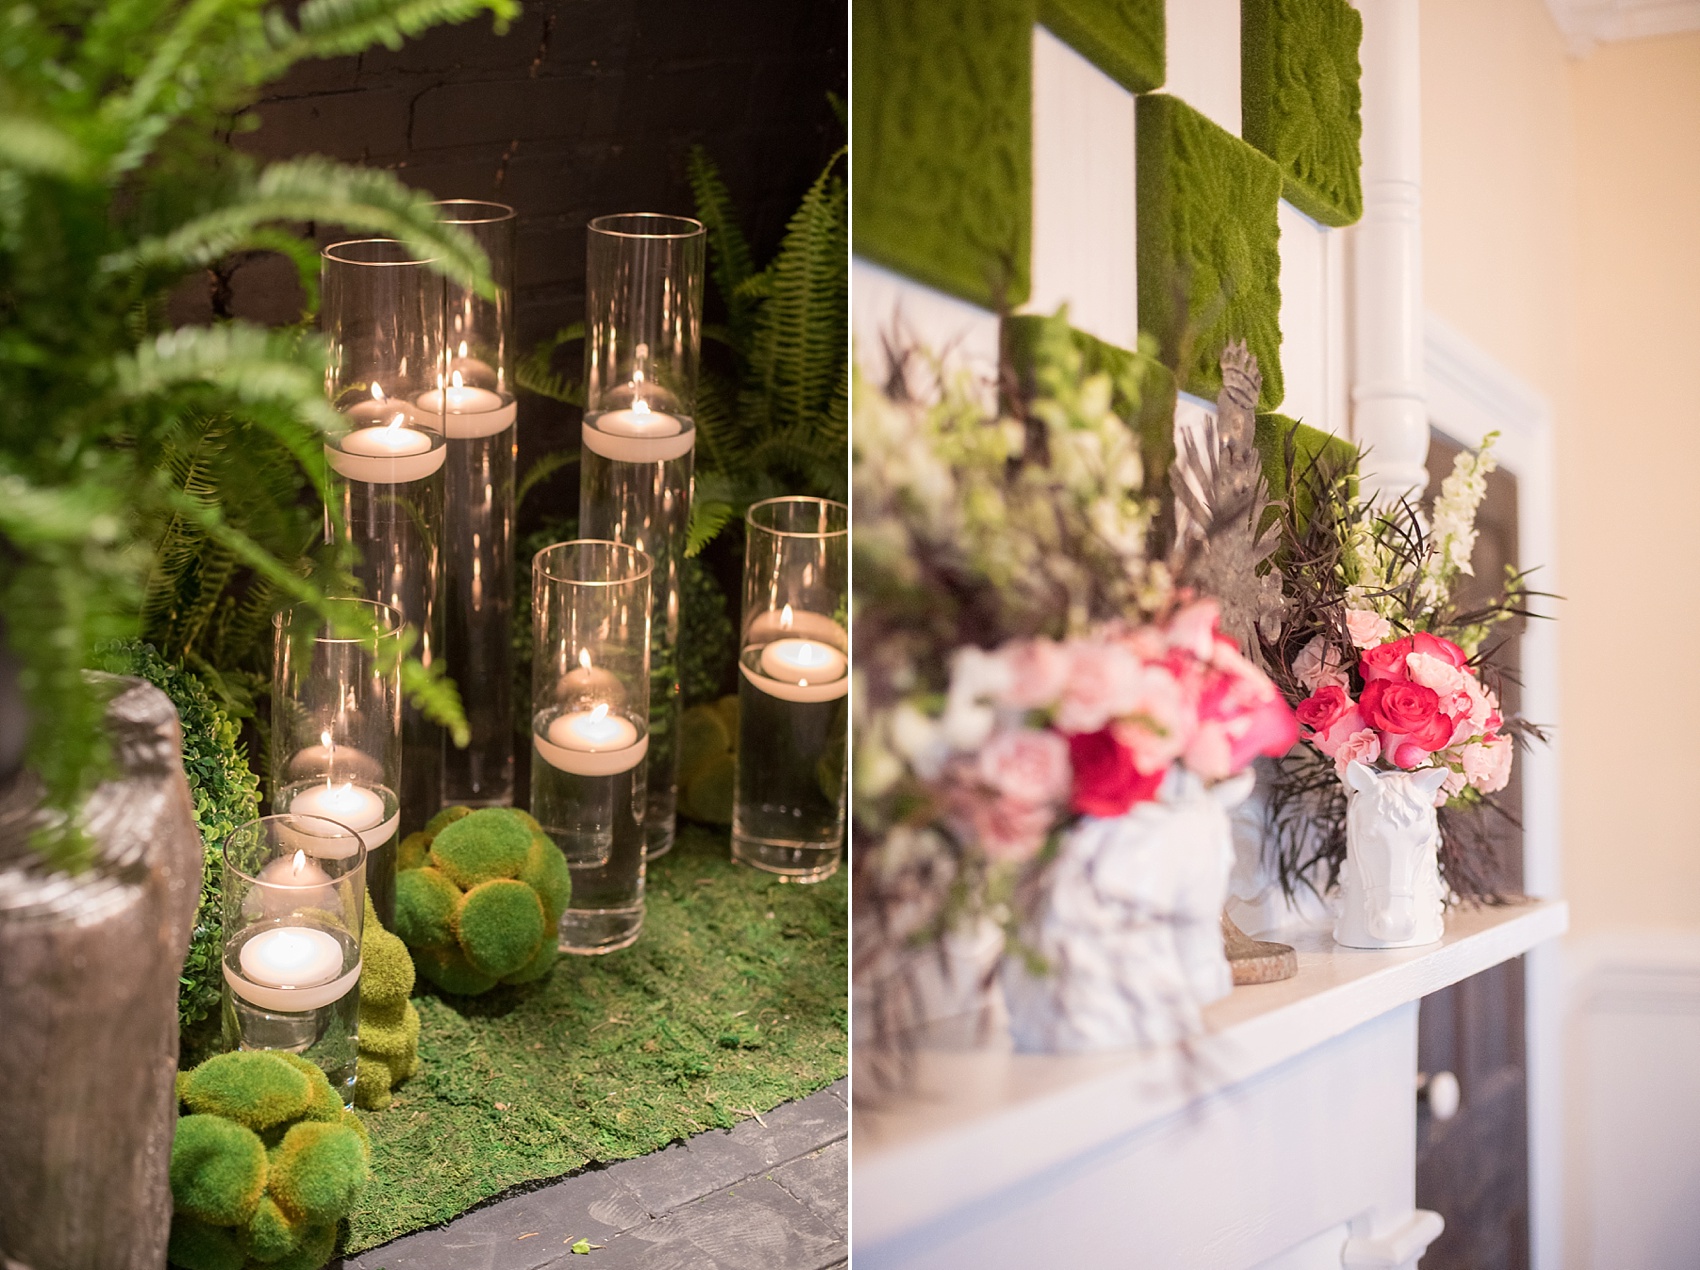 Raleigh wedding photographer Mikkel Paige captures Mim's House opening night, with an Alice in Wonderland theme and floral arrangements by Eclectic Sage.